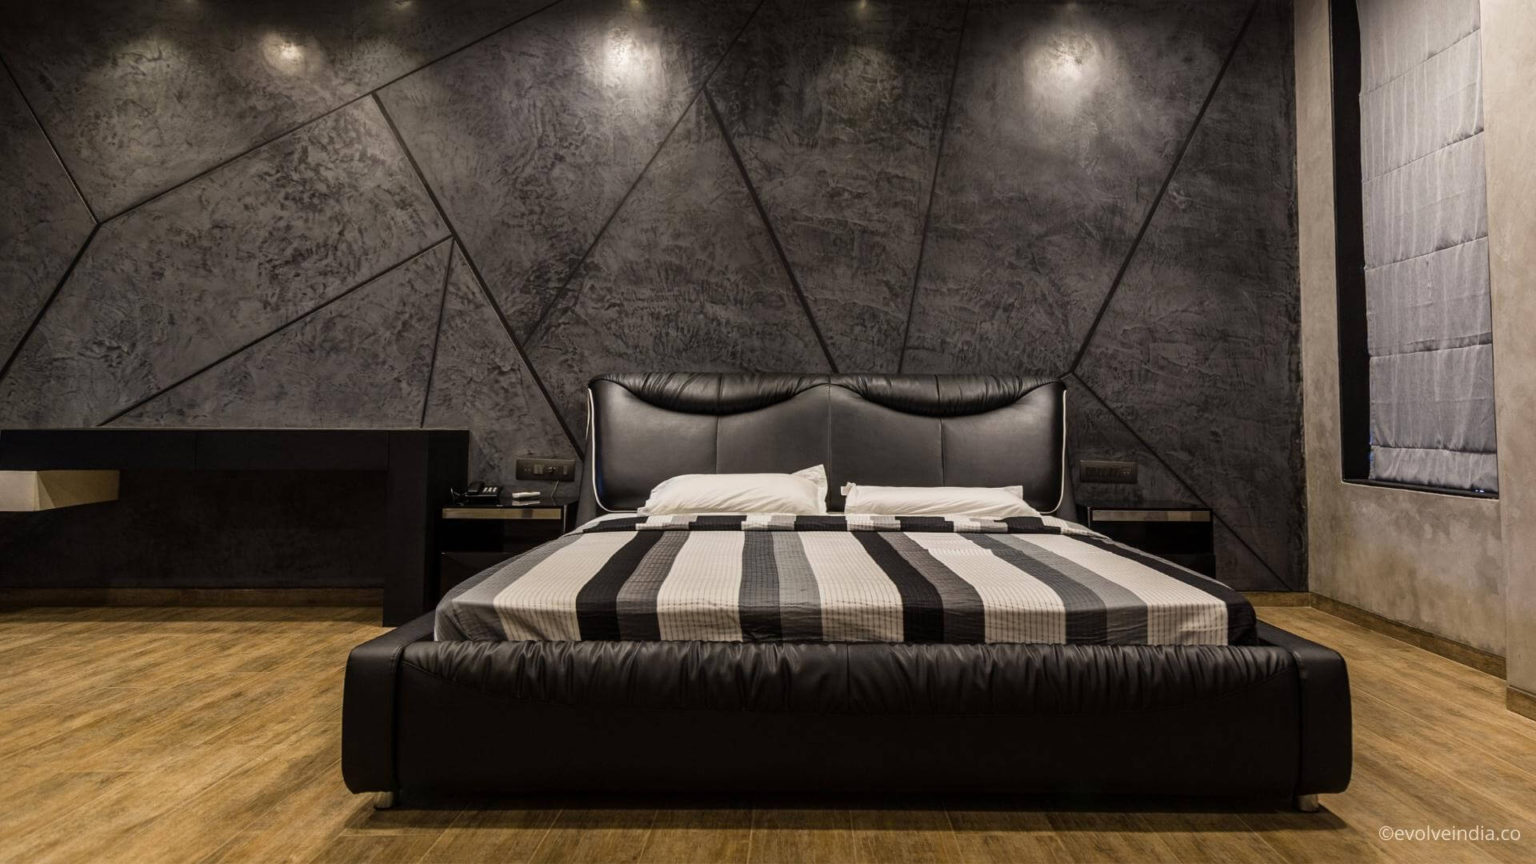 Textured Concrete Finished Modern Bed Back Wall Design 1536x864 